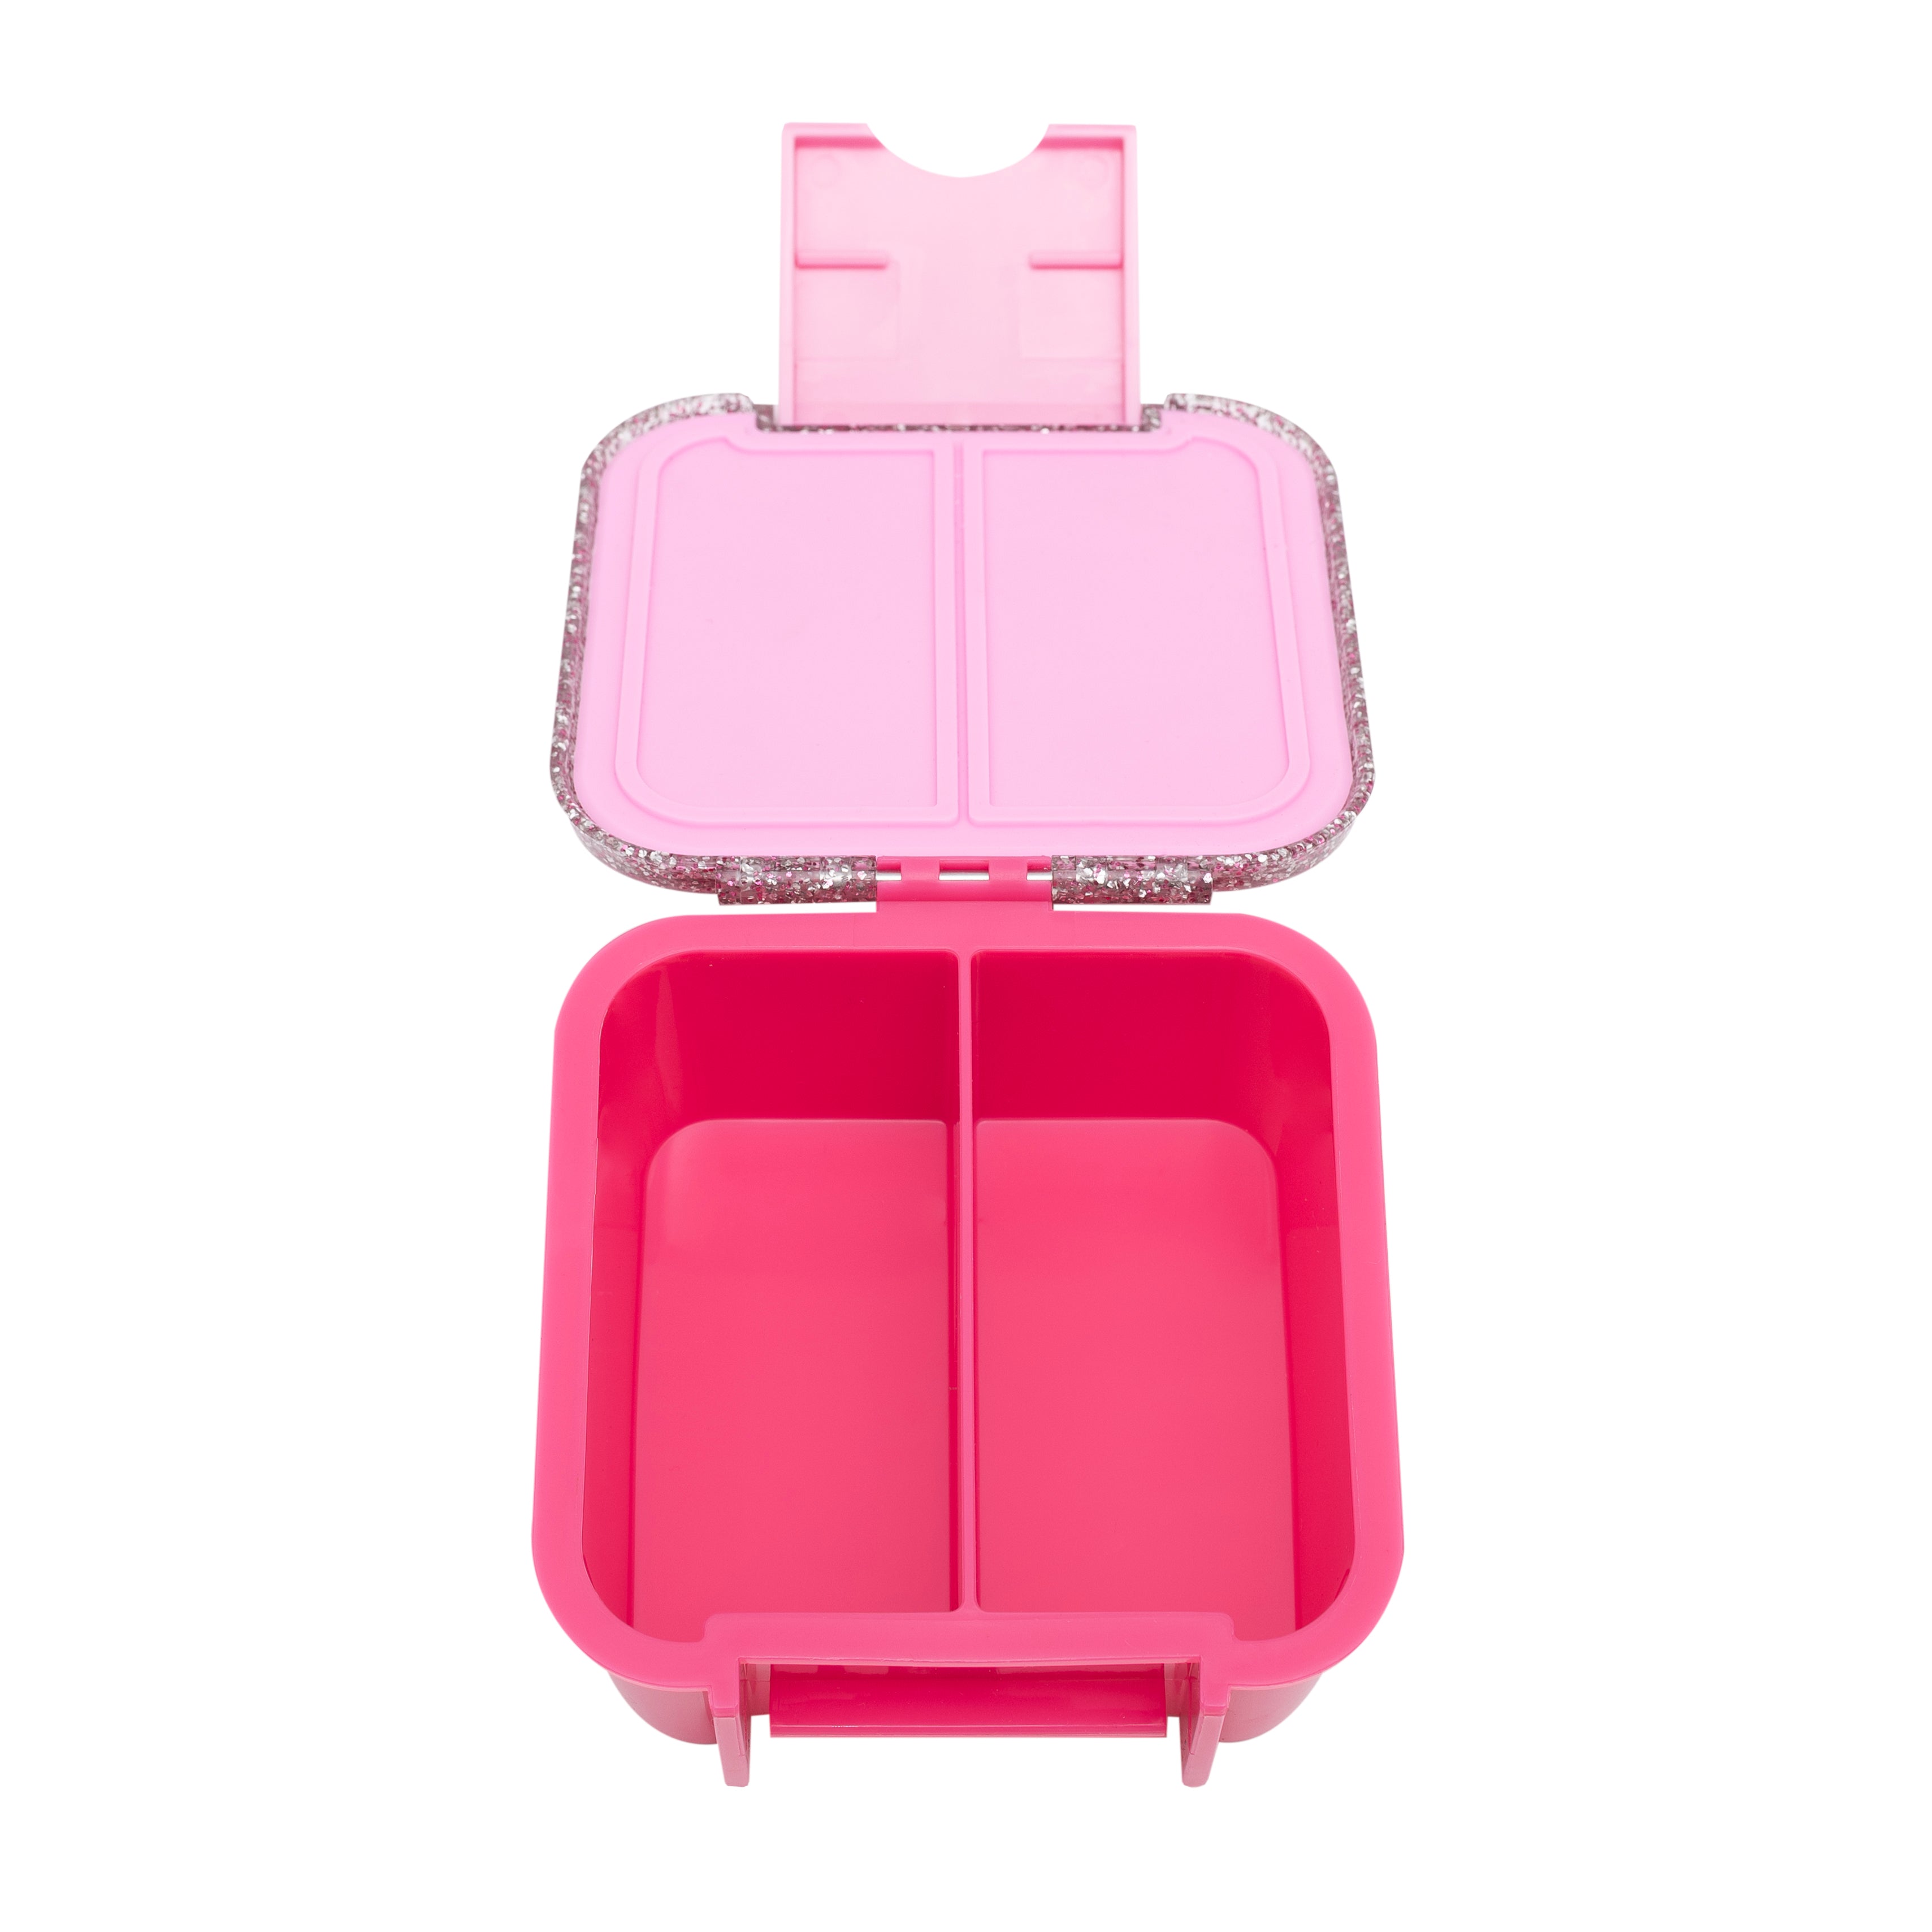 Little Lunch Box - Bento Two - Pink Glitter (Pre-order) | Little Baby.